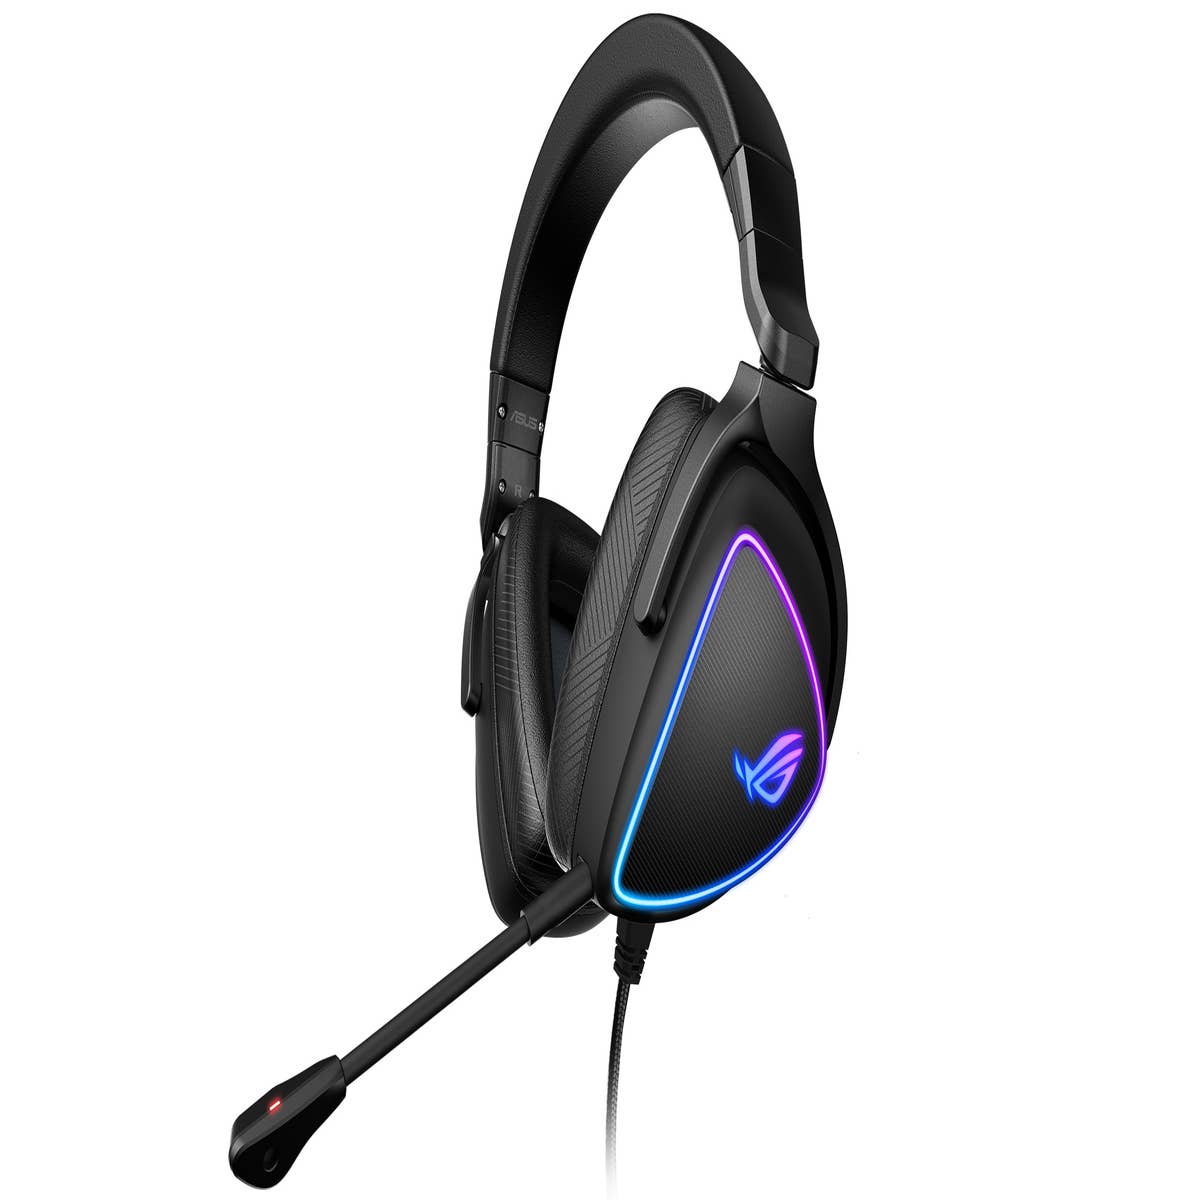 The best gaming headsets, tried and tested gaming headsets to buy